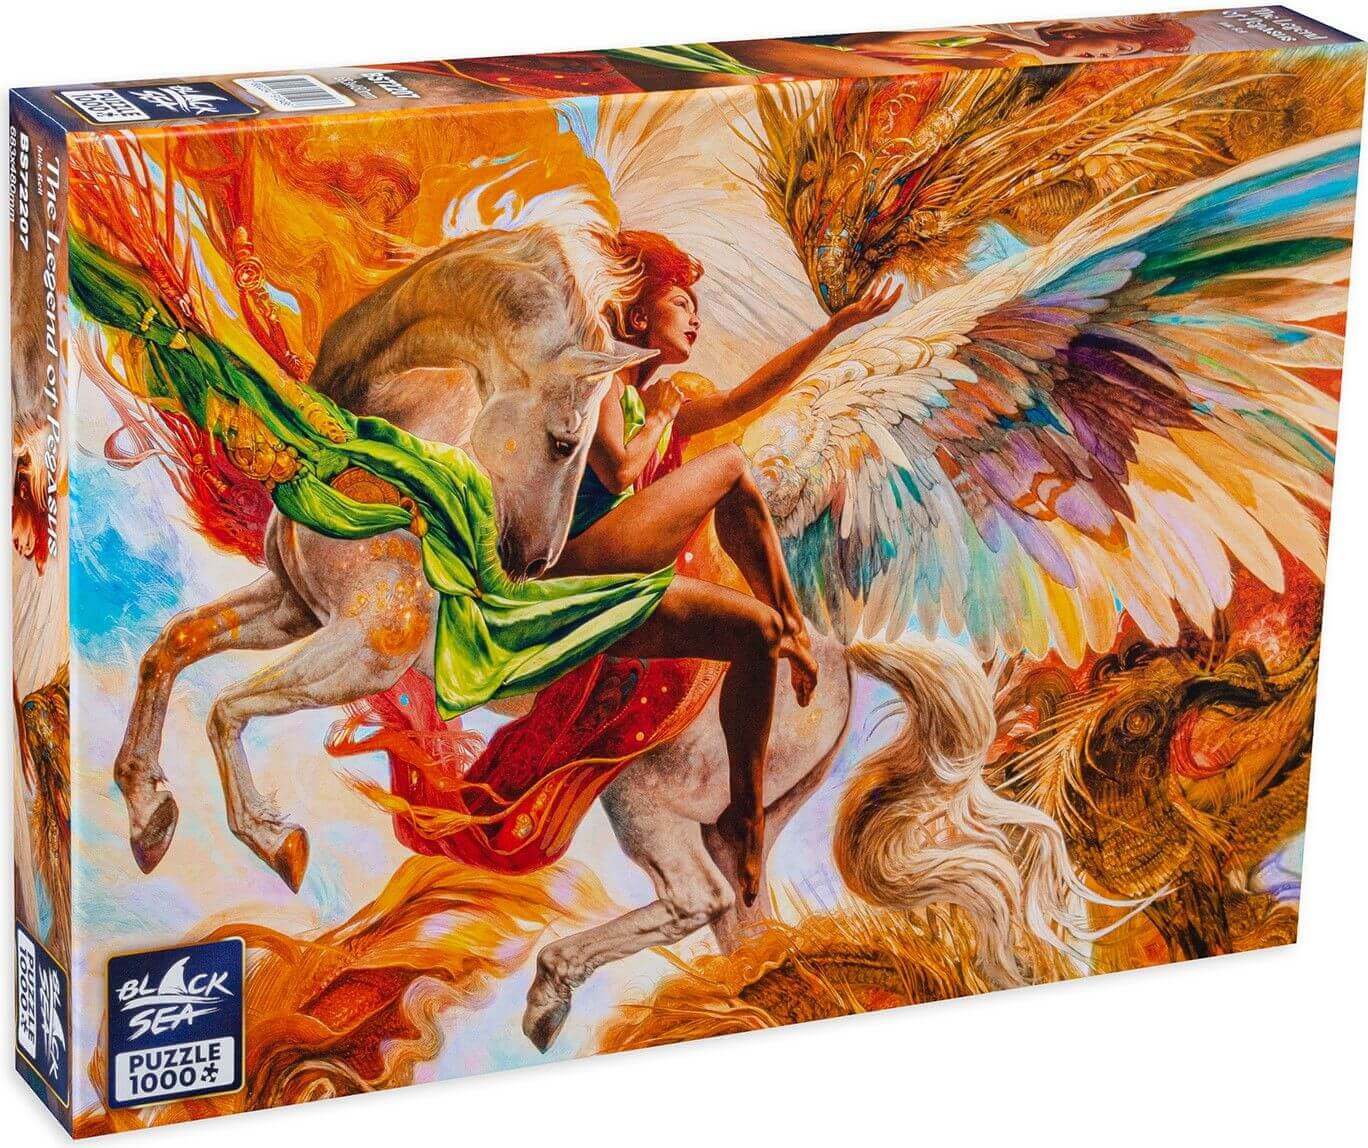 Puzzle Black Sea Premium 1000 pieces - The Legend of Pegasus, Violent and mystical, the winged horse Pegasus, recreated with an enviable mastery by the artist Julie Bell, is one of the most recognizable images in the ancient Greek mythology. According to